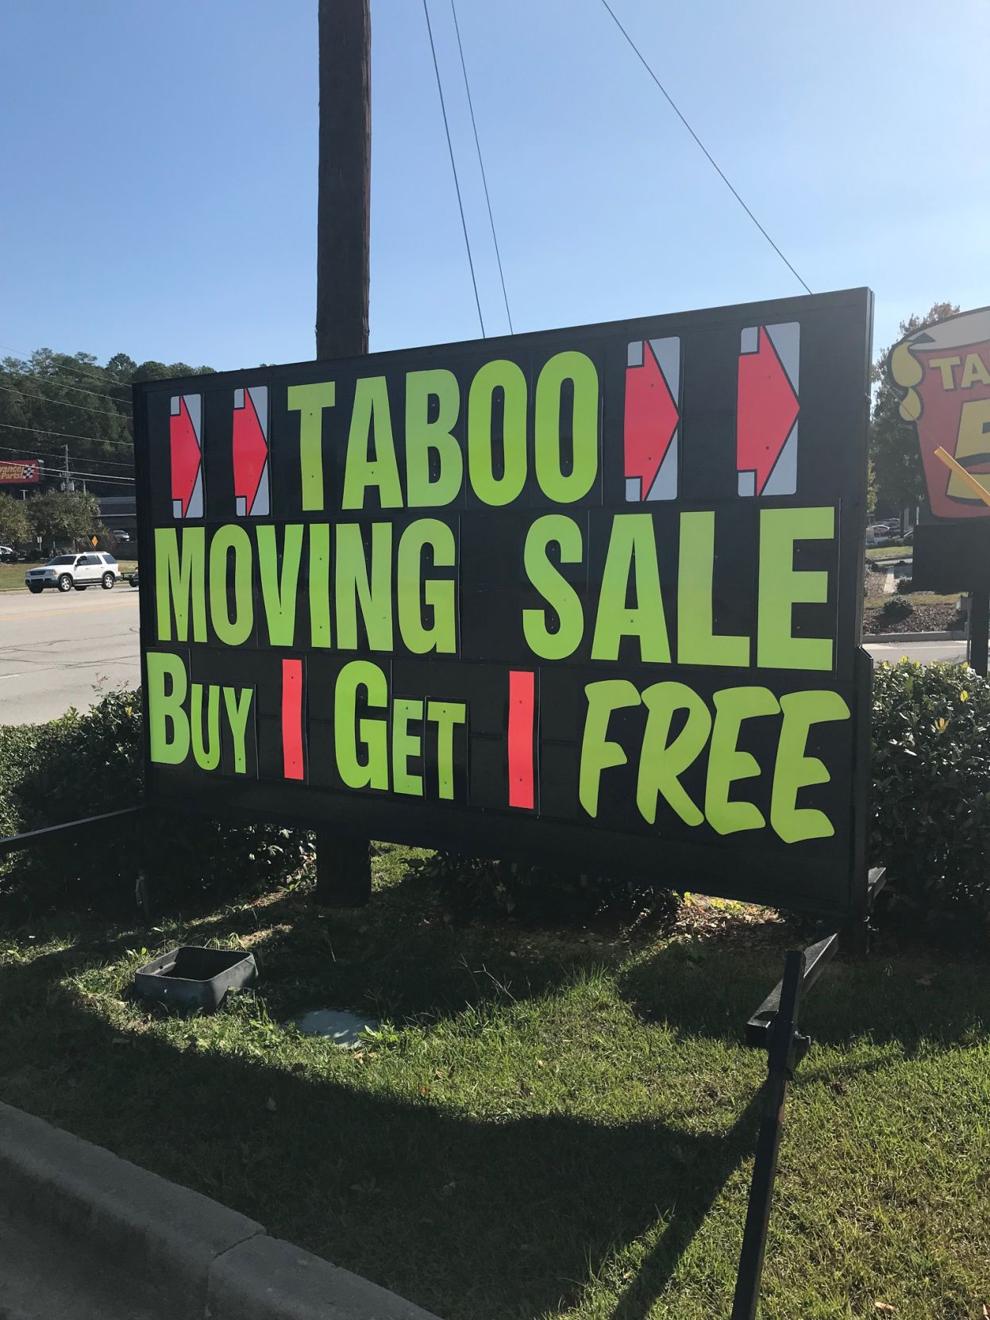 Columbias Only Adult Store Plans To Move After Years Of Fighting 